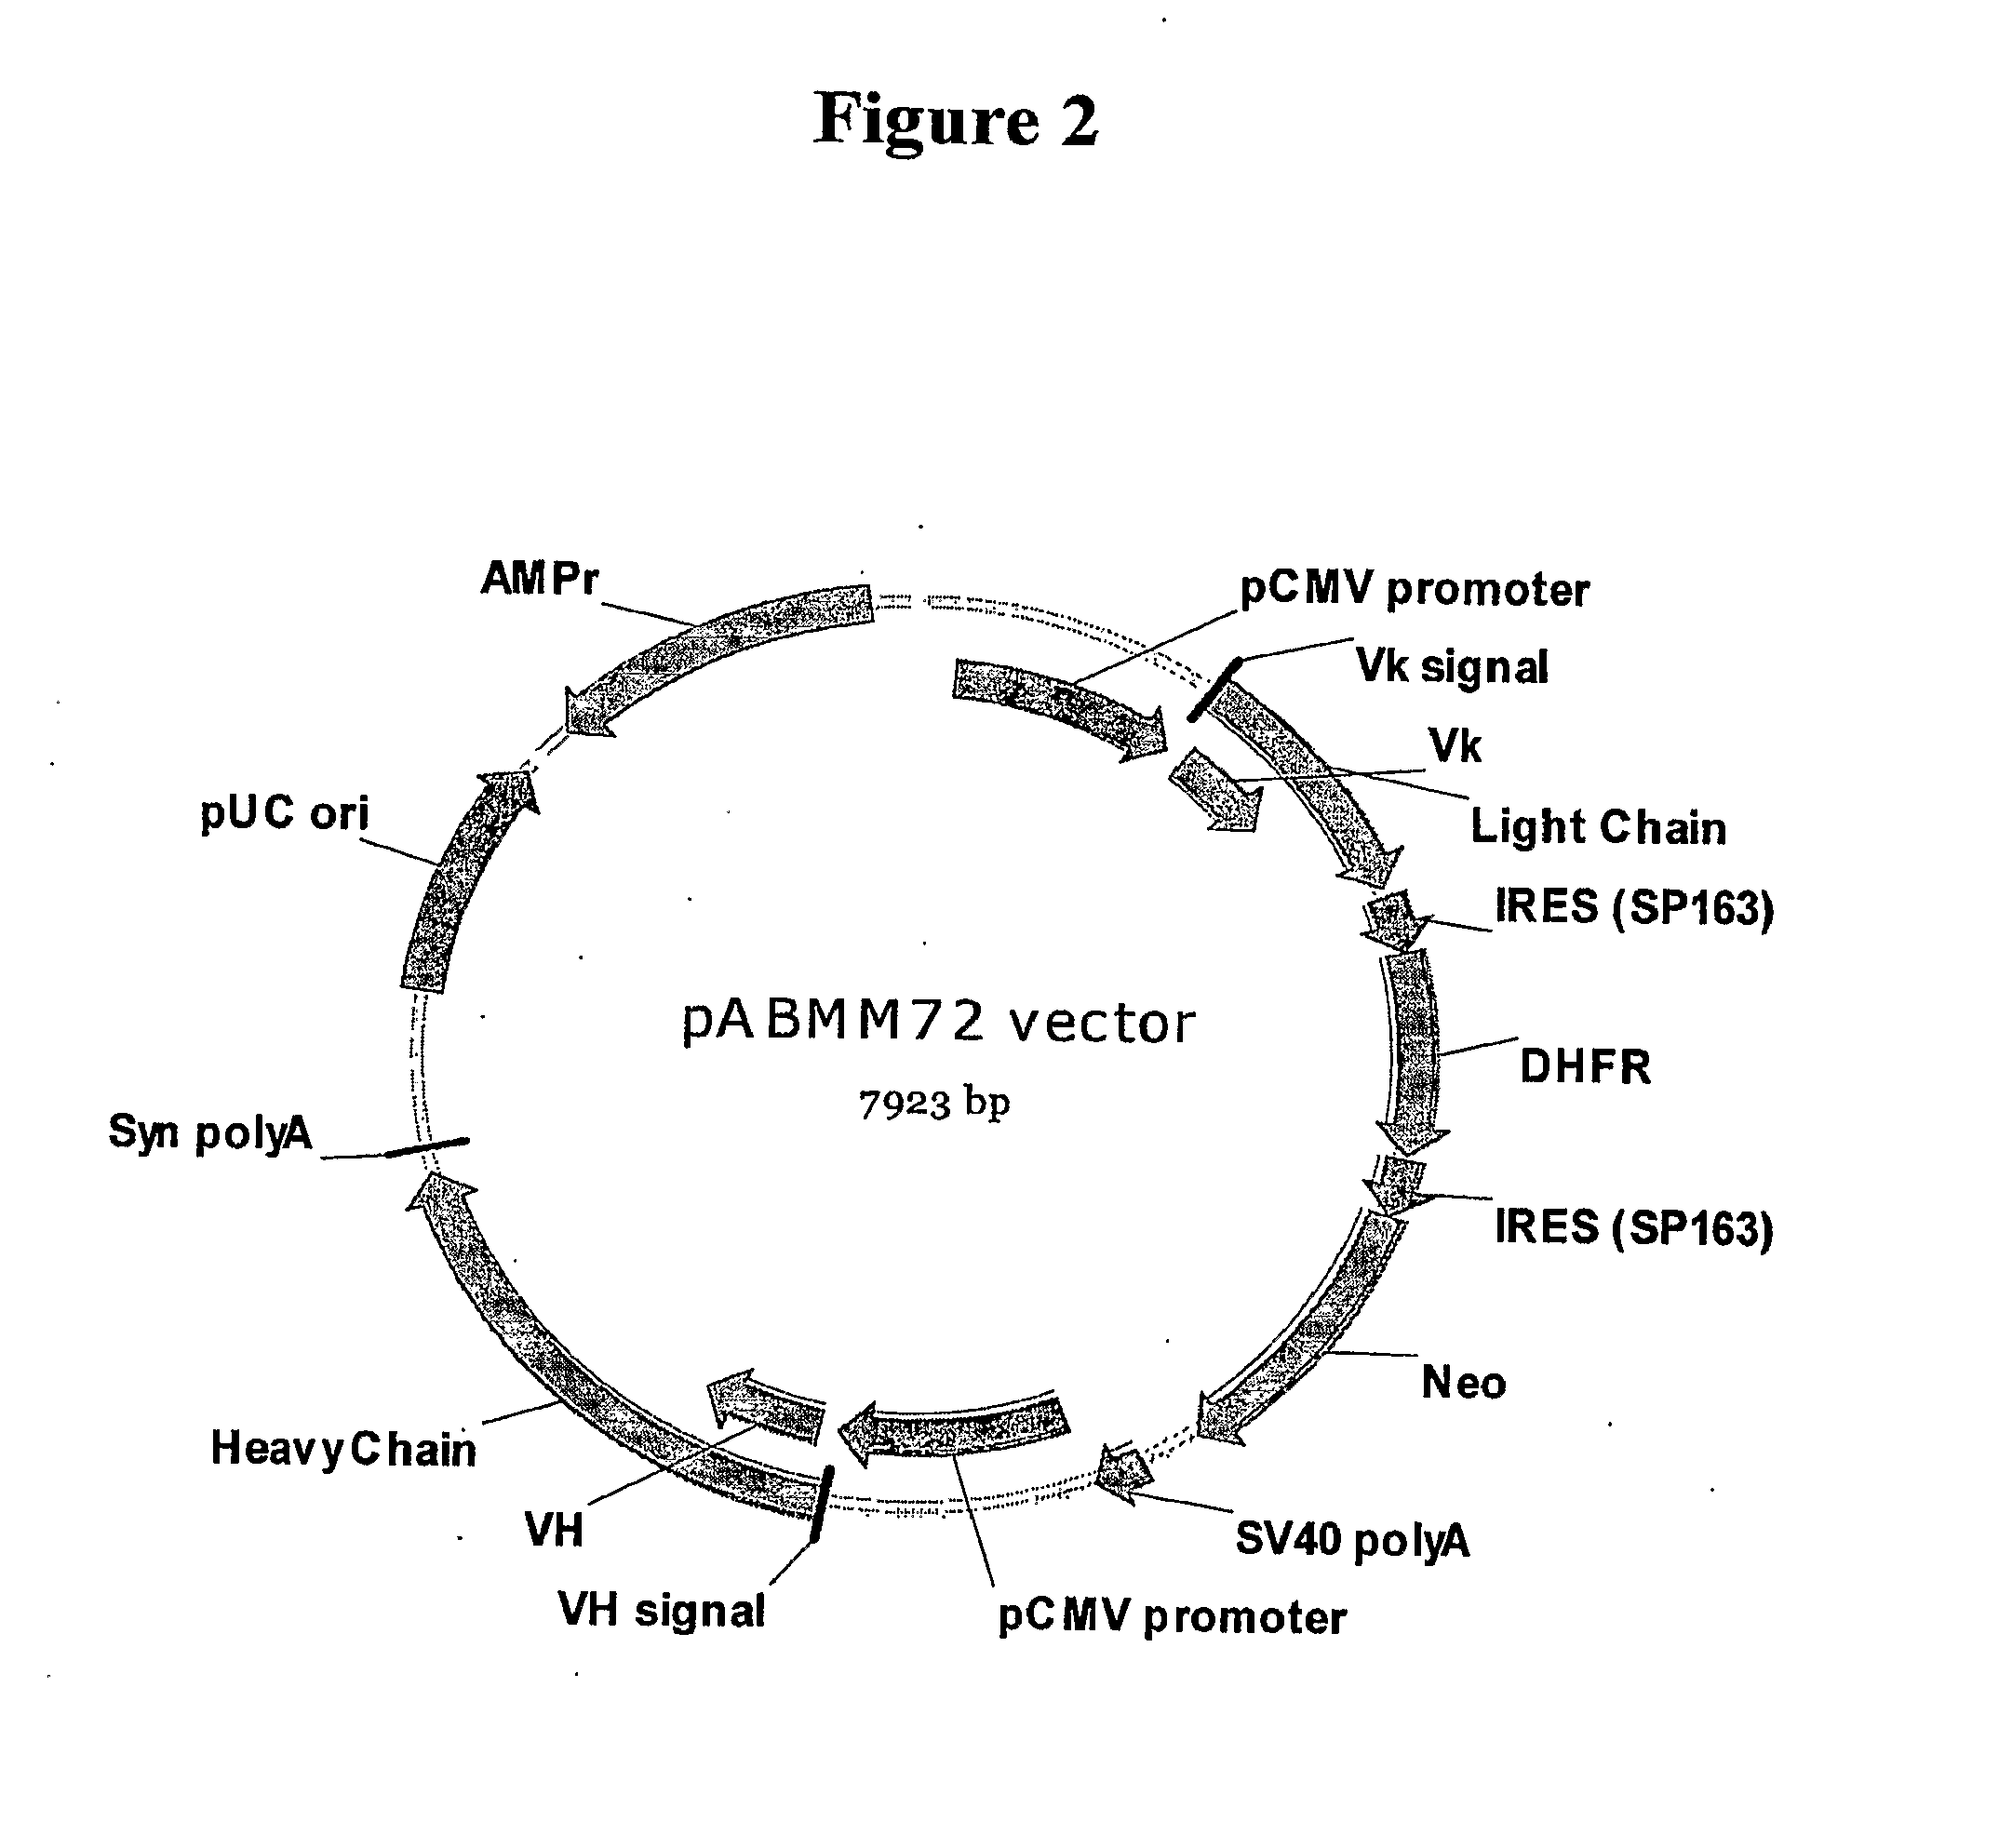 Method for Producing Stable Mammalian Cell Lines Producing High Levels of Recombinant Proteins